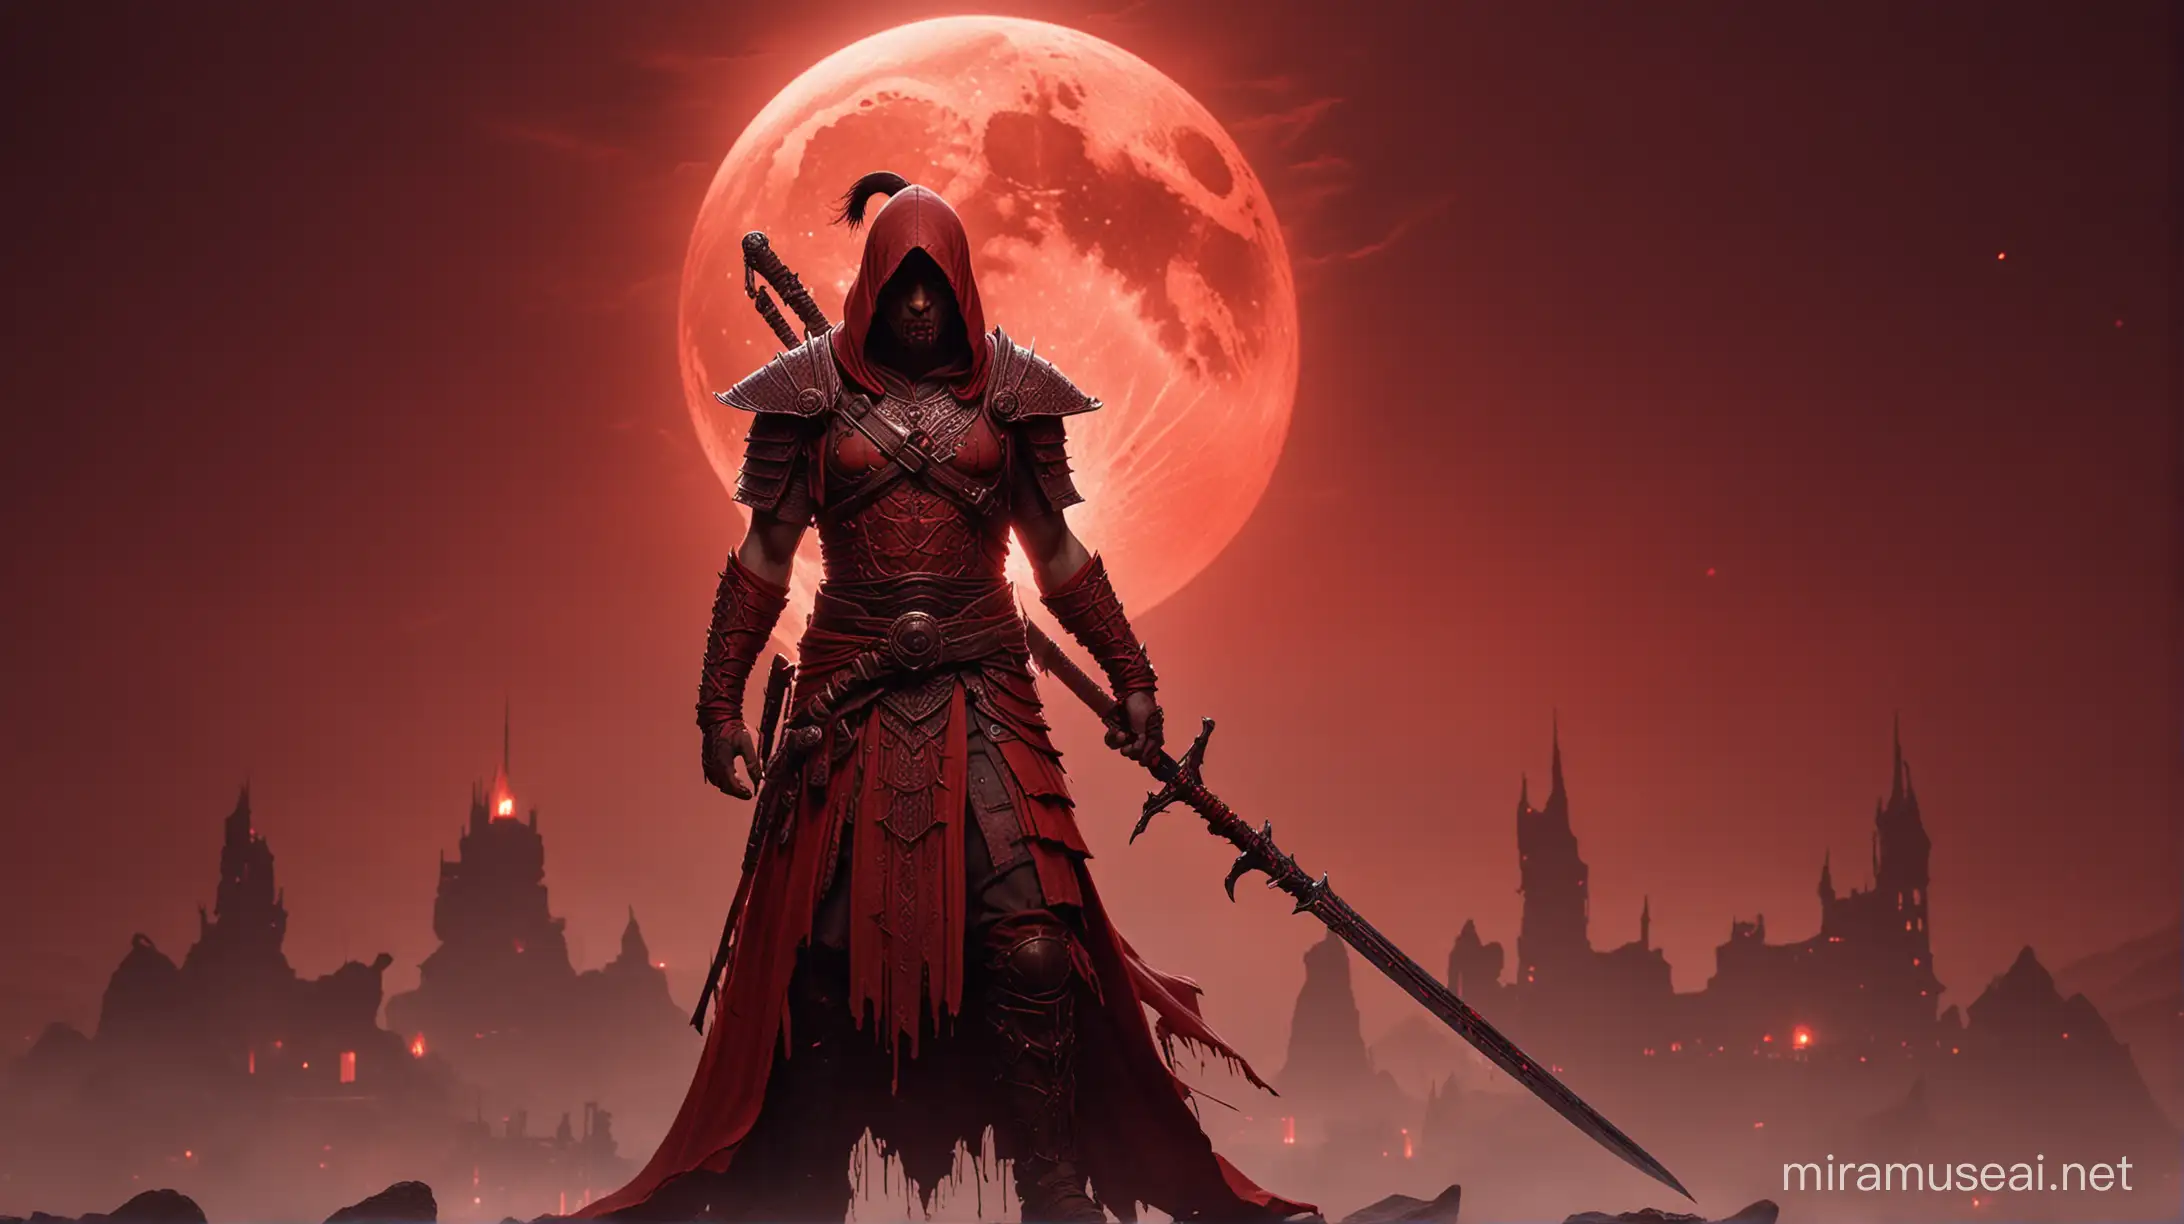 warrior in red intricate clothing, holding a blood dripping sword, looking at a blood moon, red back ground, track lighting, highly detailed 